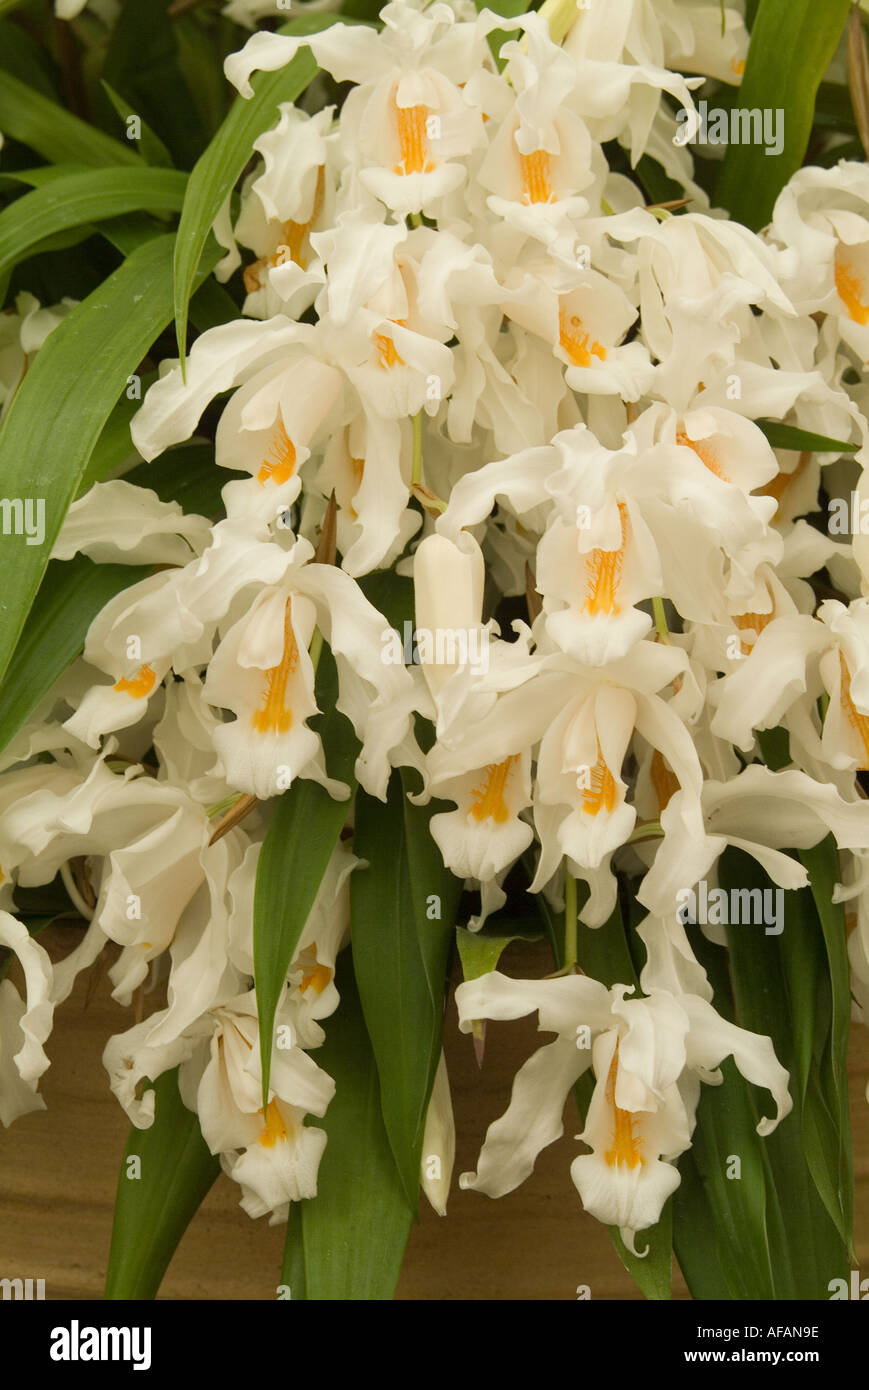 Bridal Veil Orchid Coelogyne cristata from the Himalayas Stock Photo